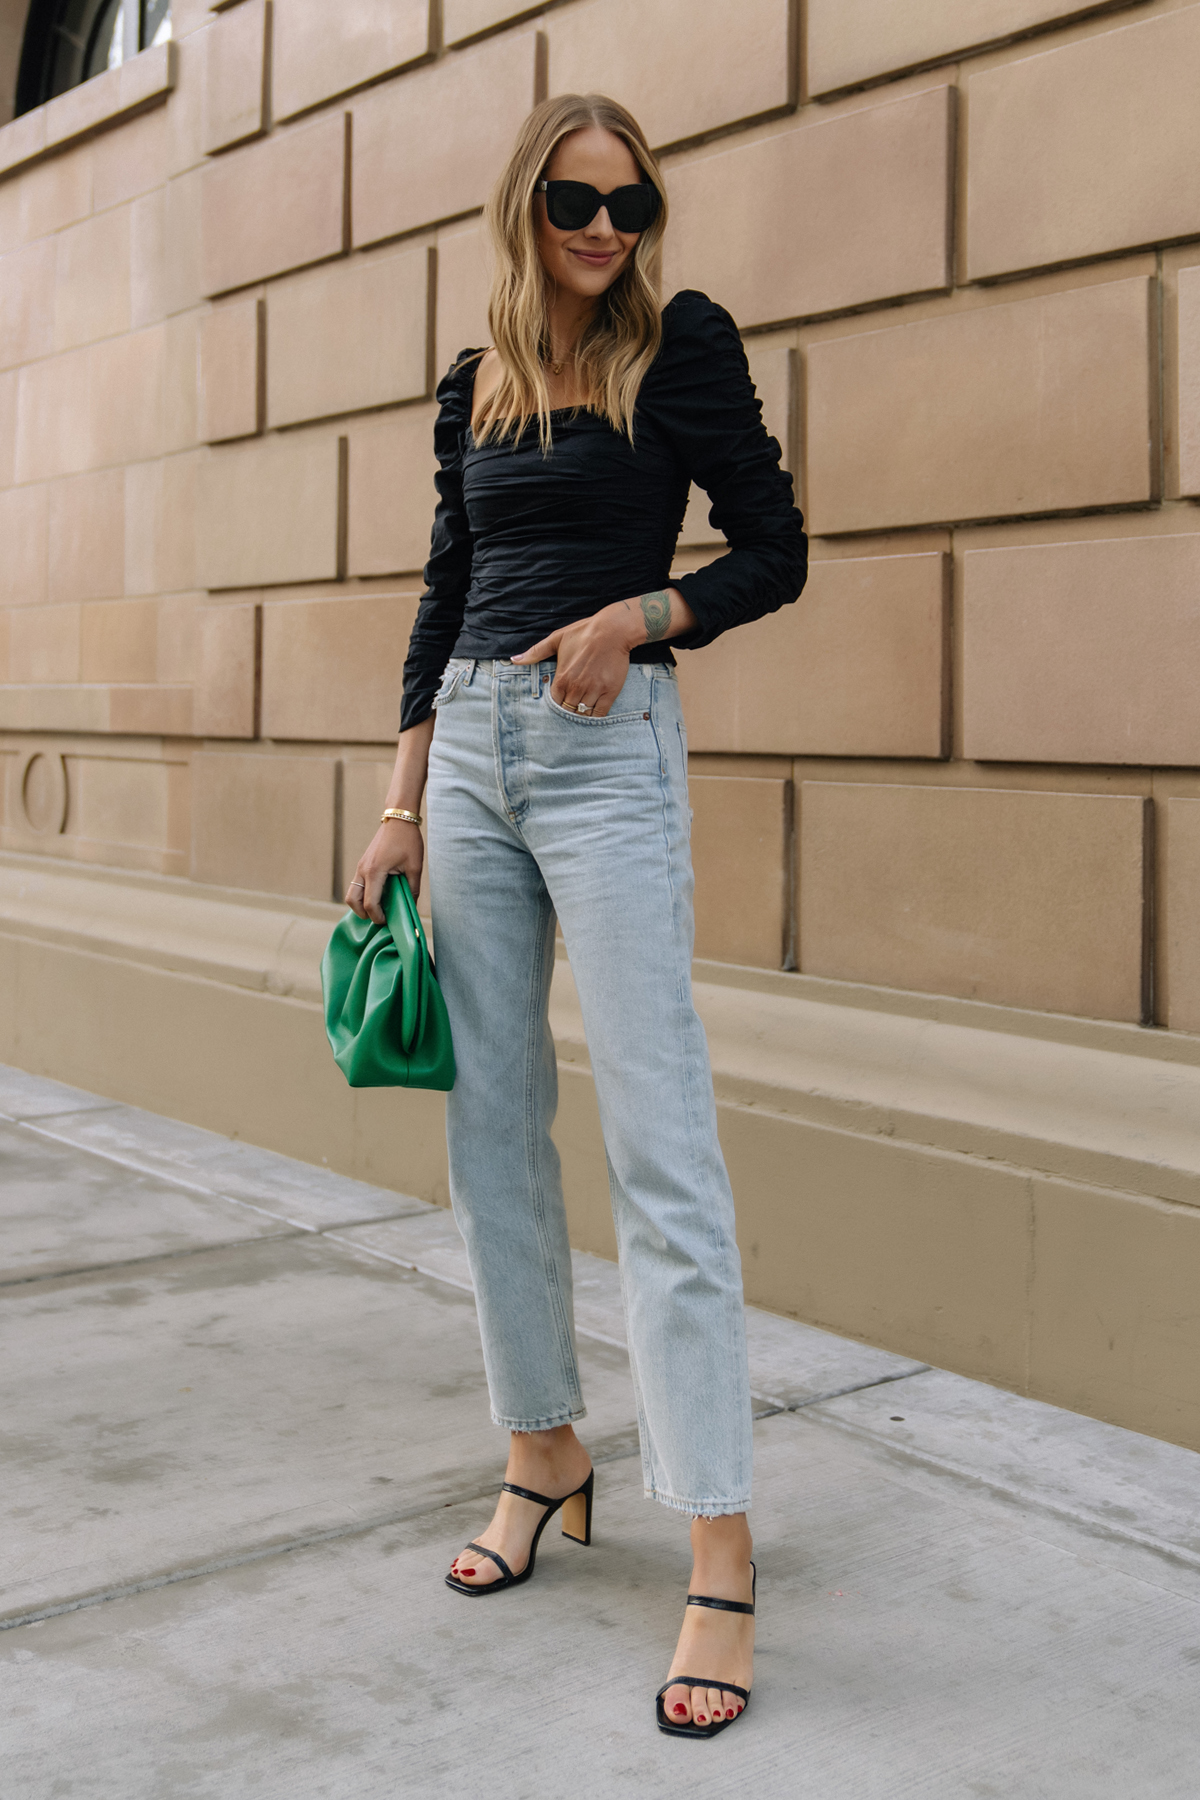 Fashion Jackson Wearing Black Rouched Reformation Top AGOLE 90s Loose Fit Jeans Black Heeled Sandals Green Clutch Spring Date Night Outfit Street Style